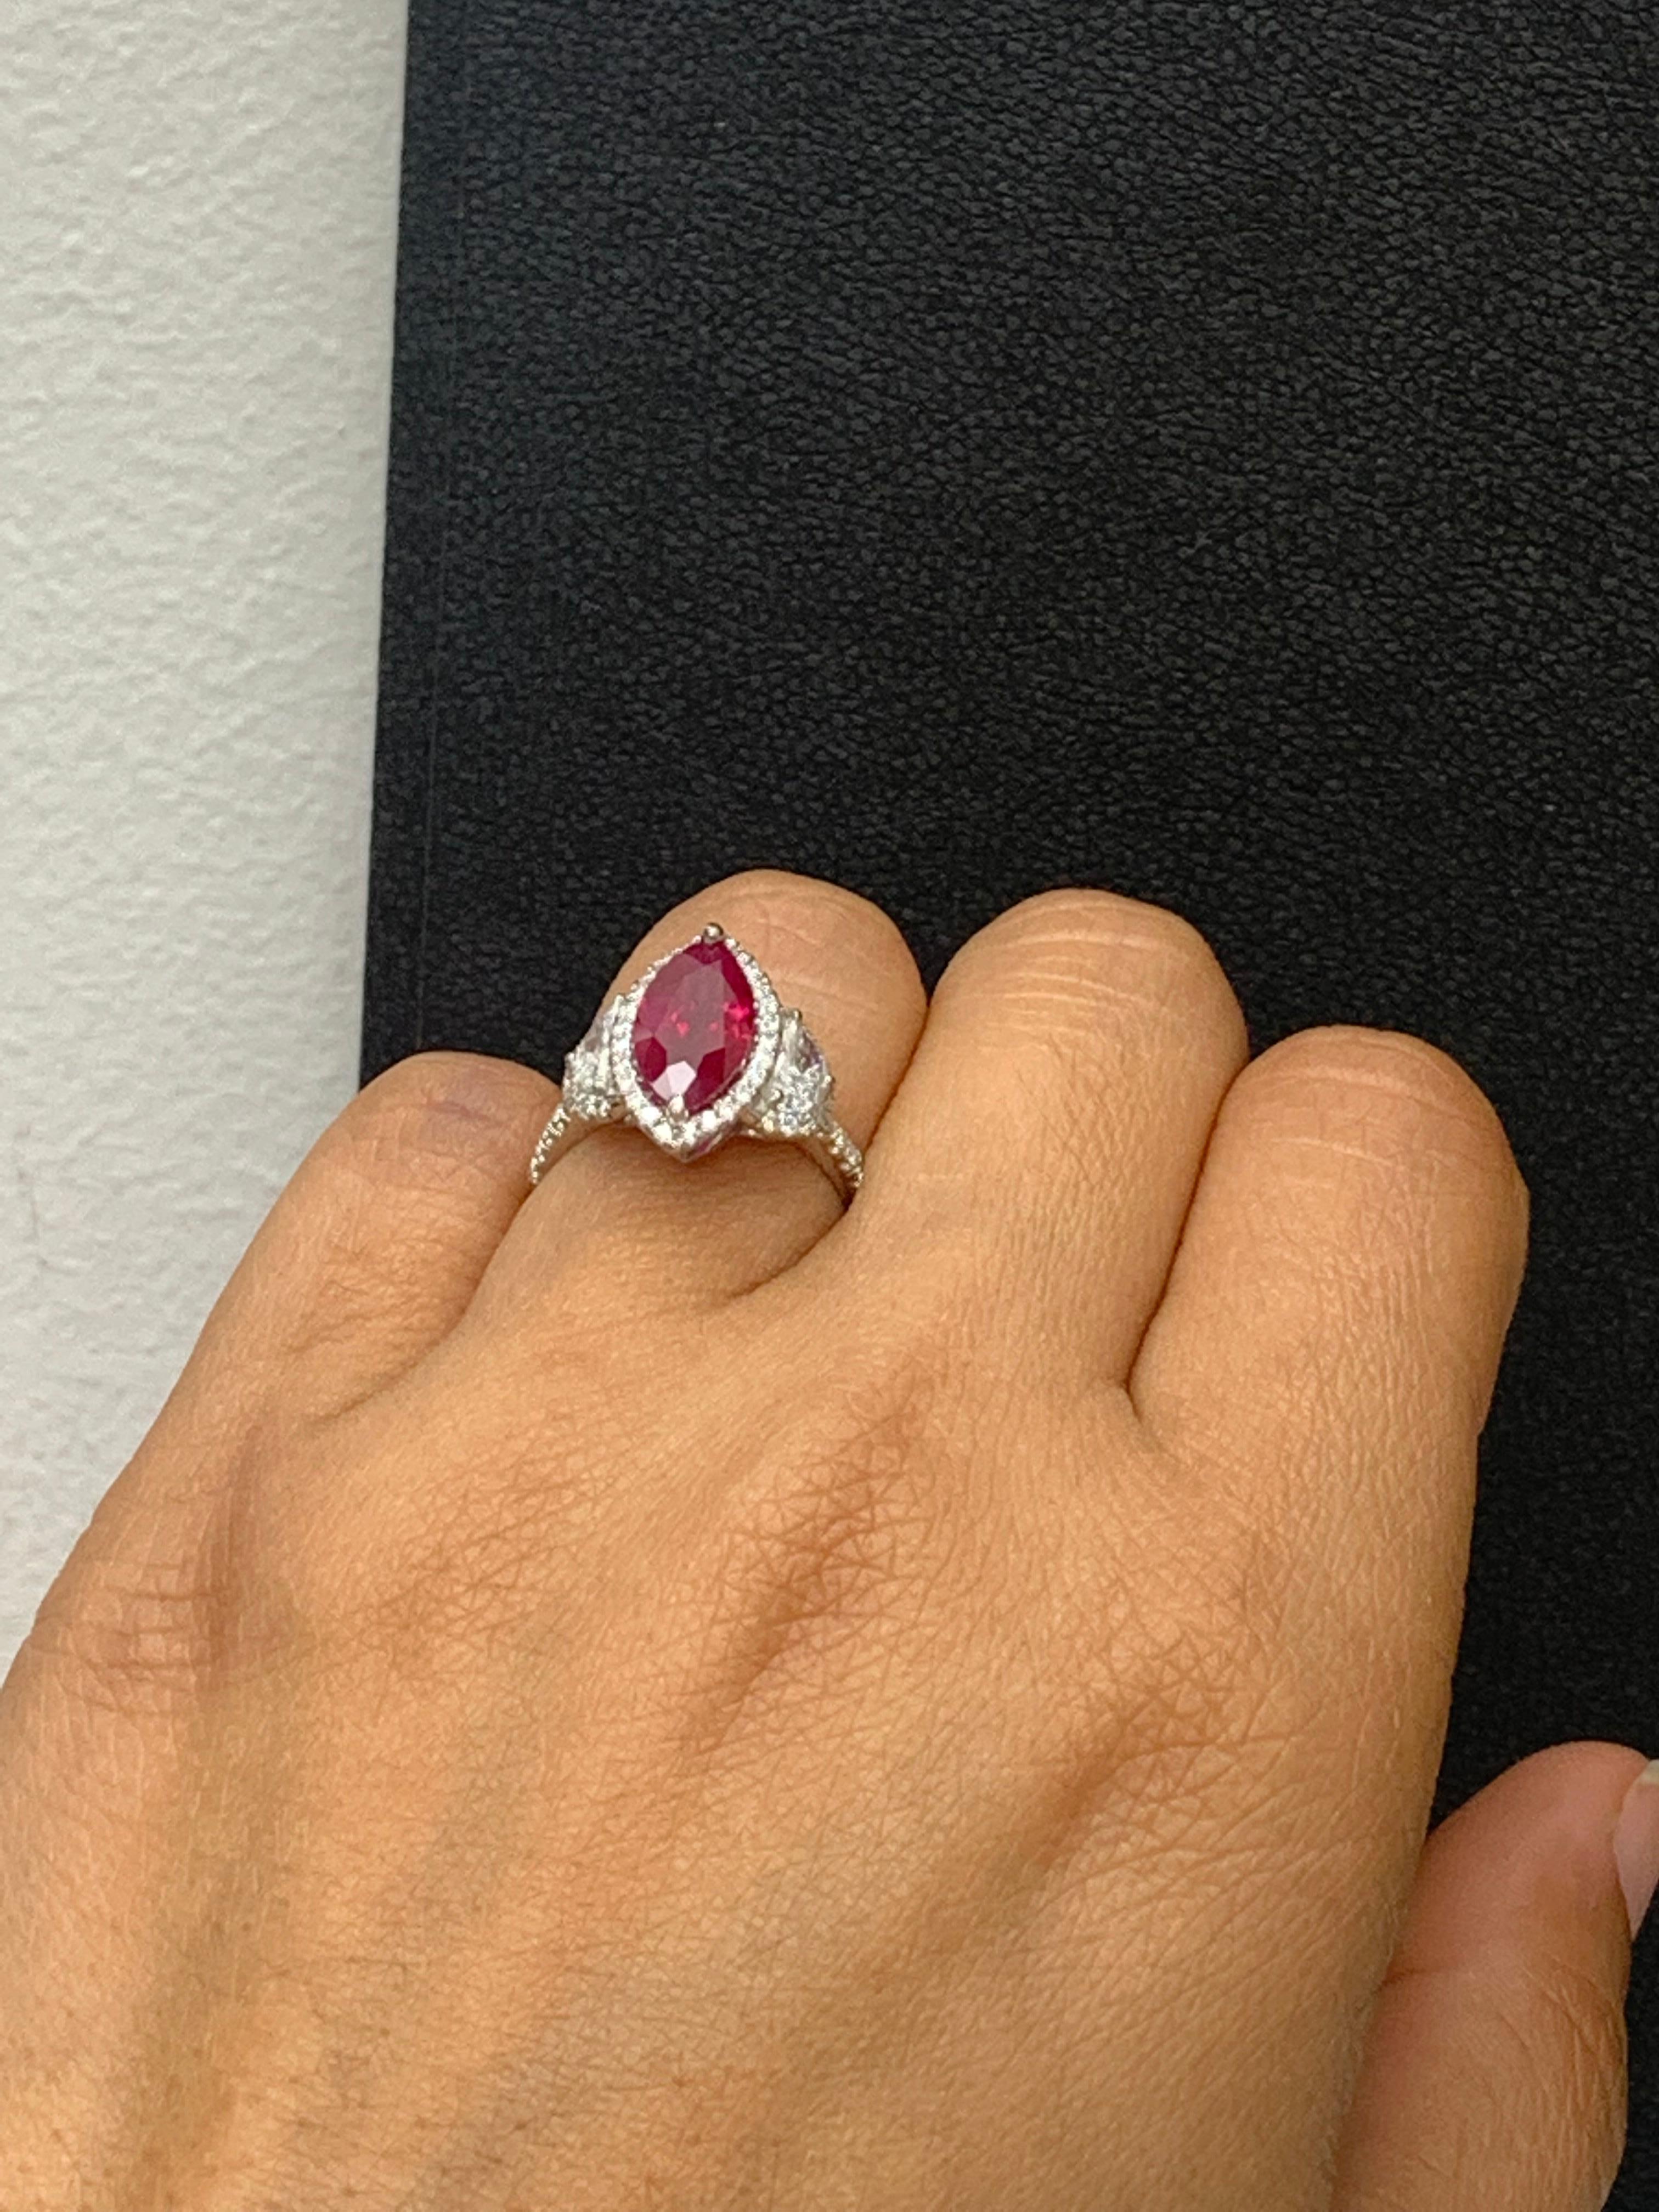 Certified 3.01 Carat Marquise Cut Burma Ruby Diamond 3 Stone Halo Ring Platinum For Sale 13